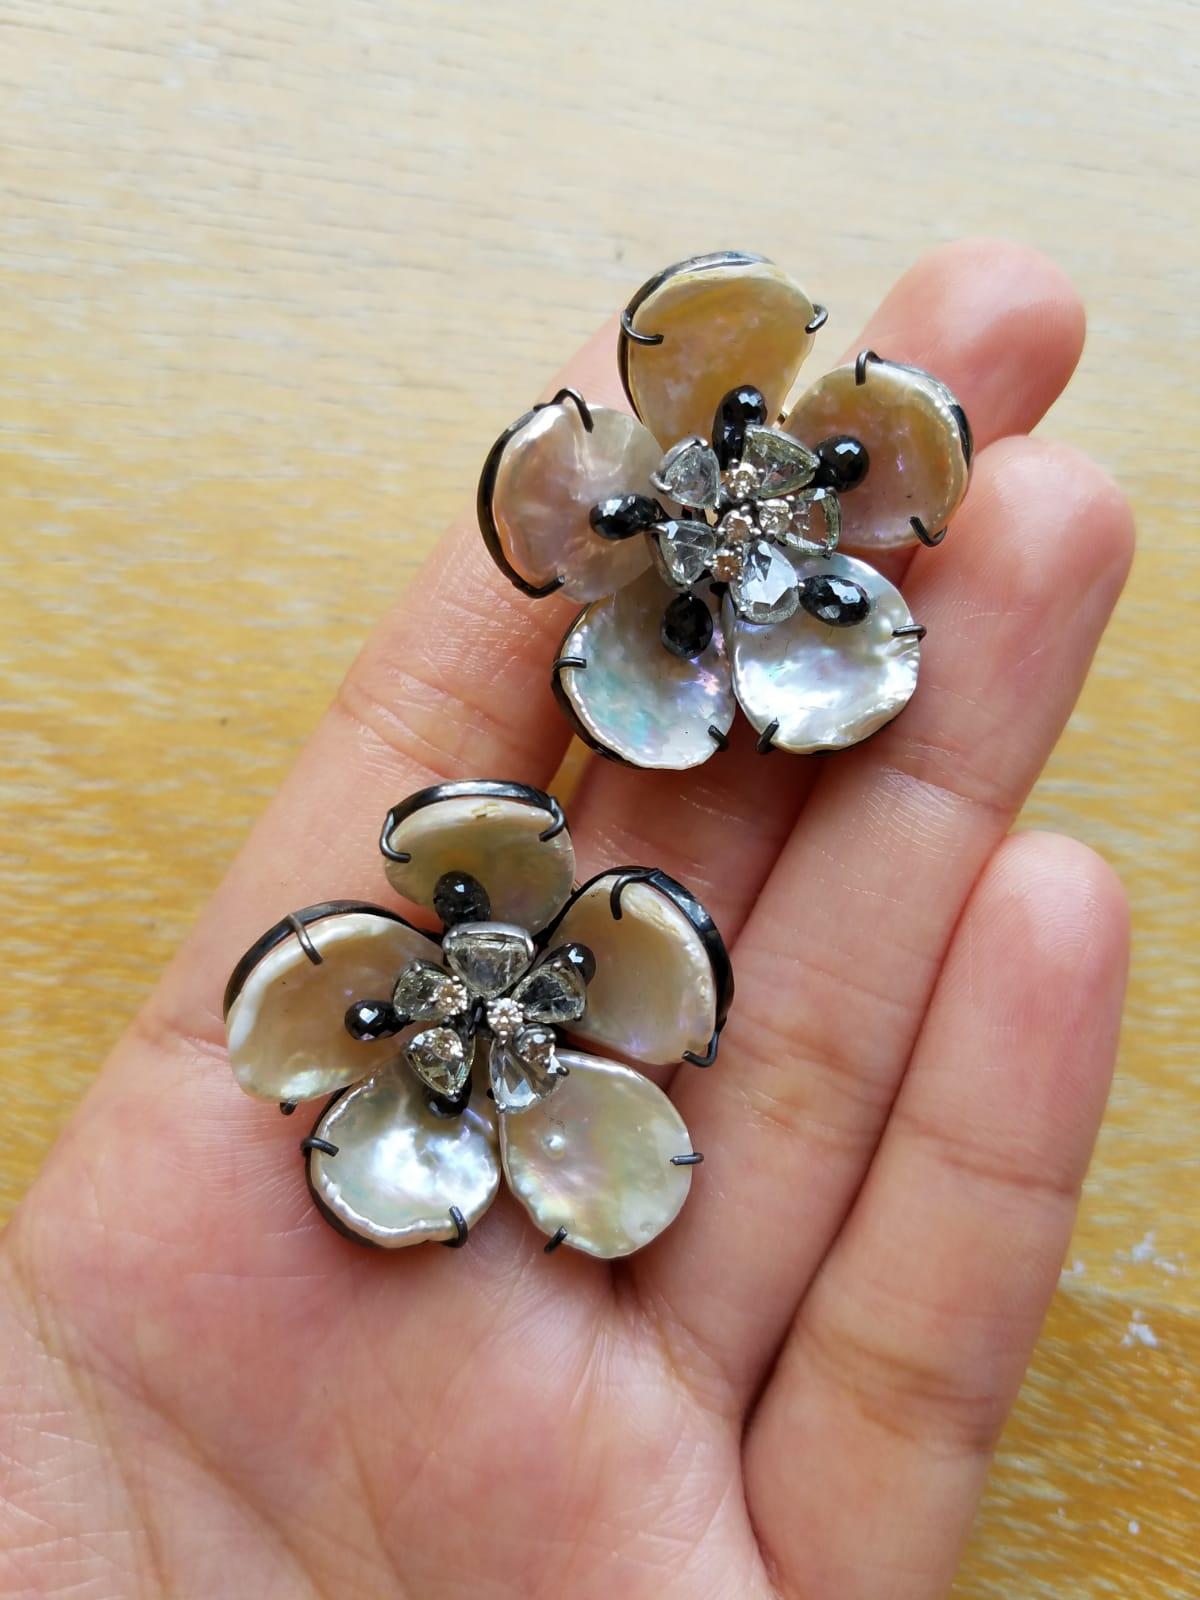 A pair of floral Mother of Pearl and black and white Diamond earrings set in Silver. These earrings truly do make a statement!